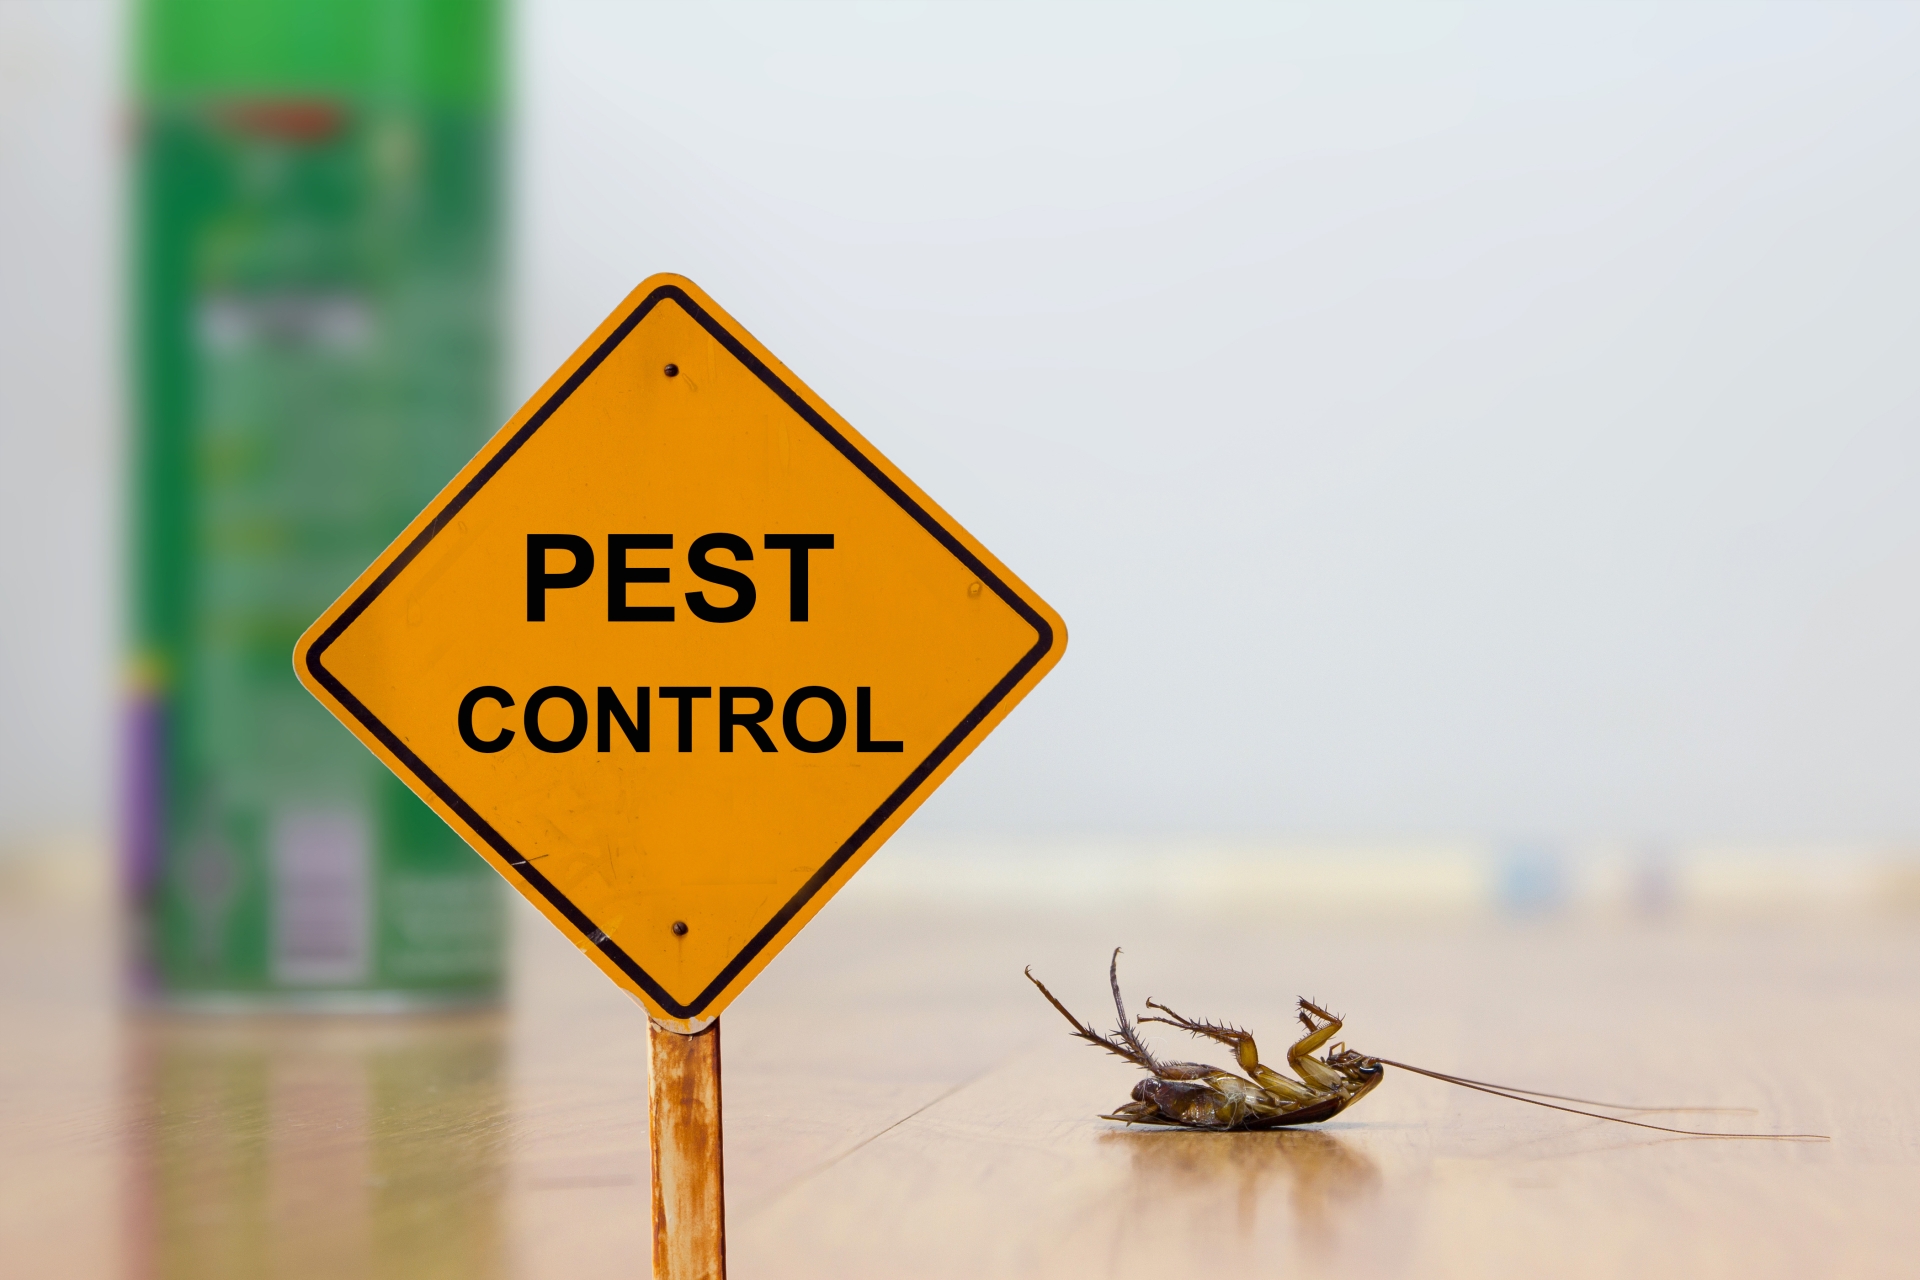 24 Hour Pest Control, Pest Control in Roehampton, SW15. Call Now 020 8166 9746